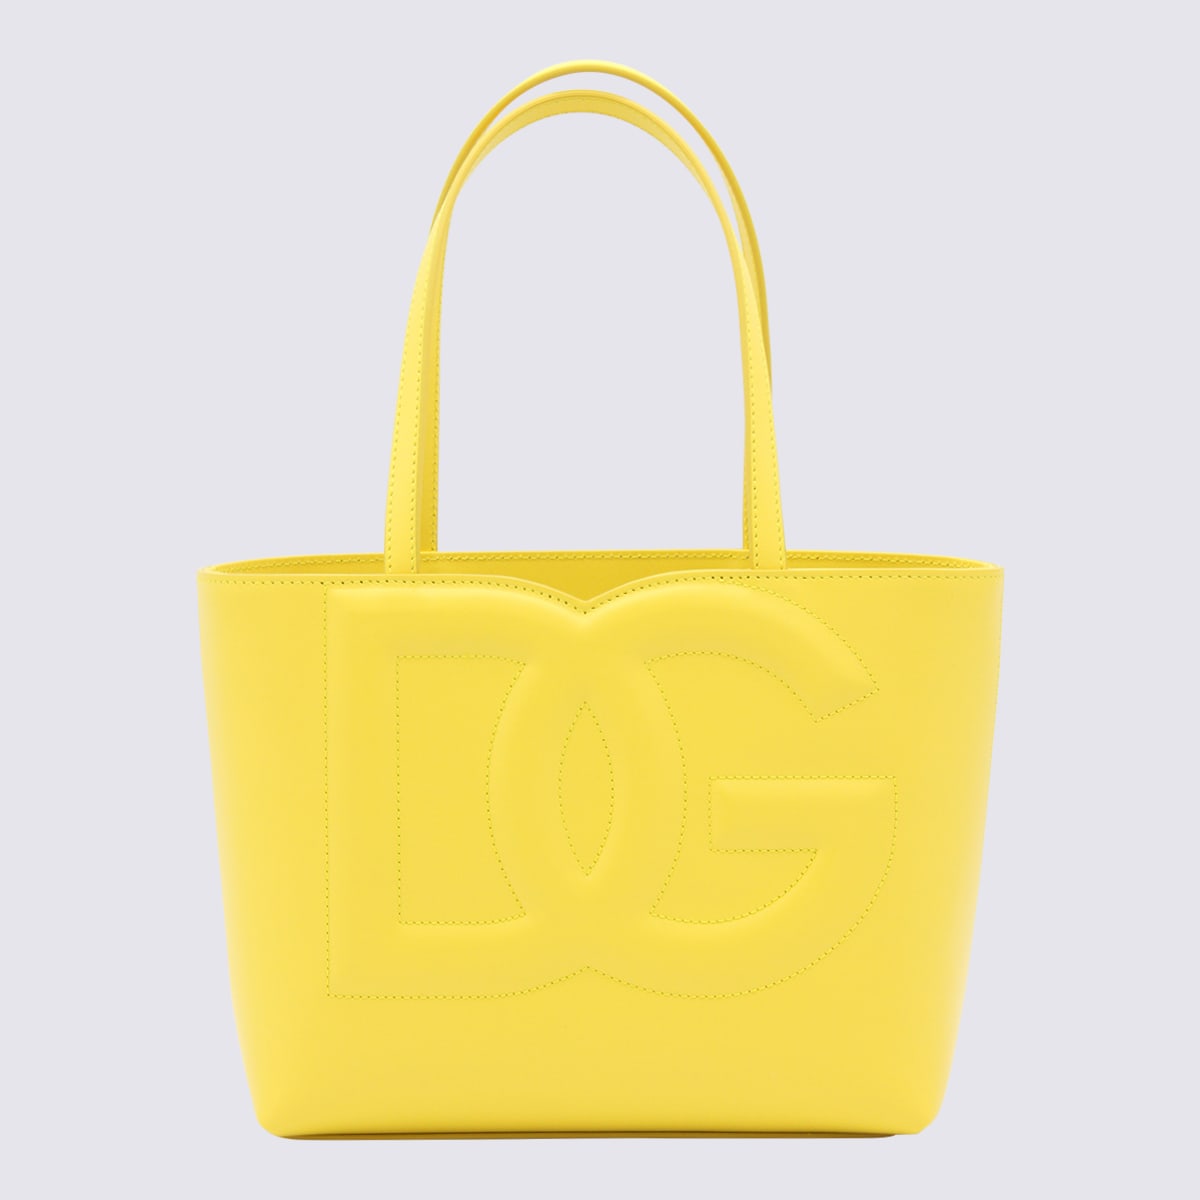 Dolce & Gabbana Yellow Leather Tote Bag